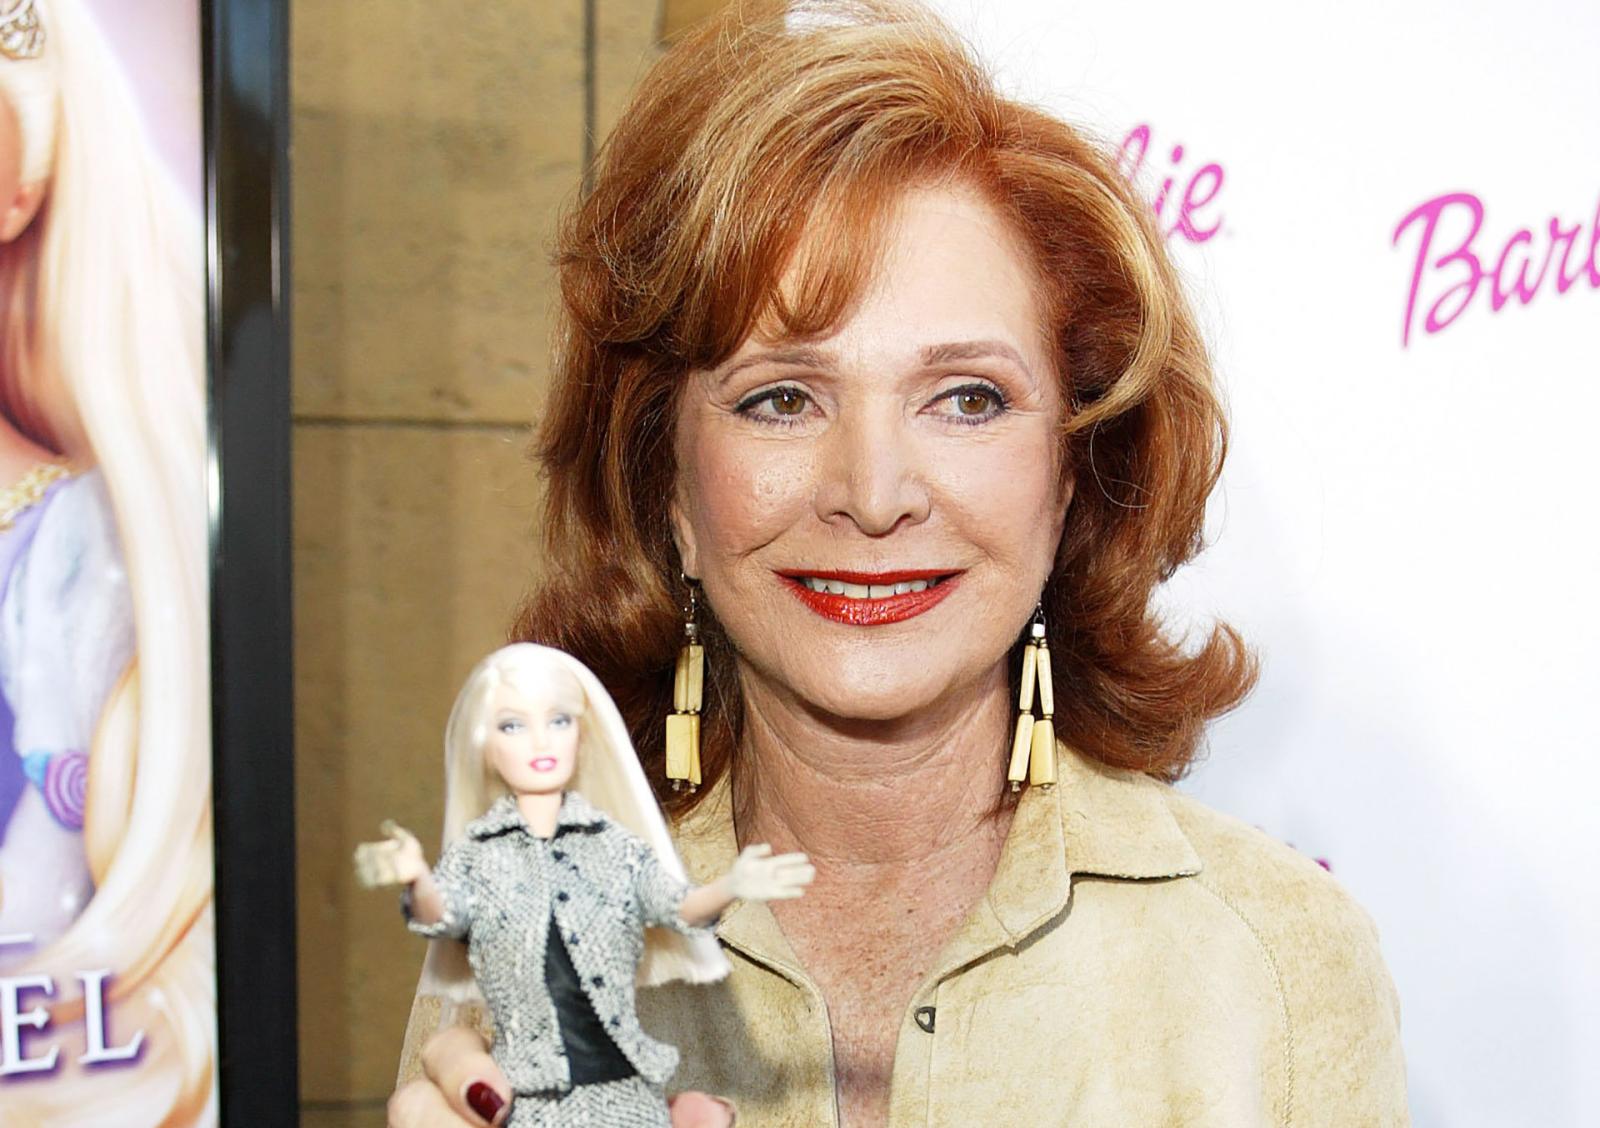 Here's What the Real-Life Woman Who Inspired Barbie Looks Like - image 2